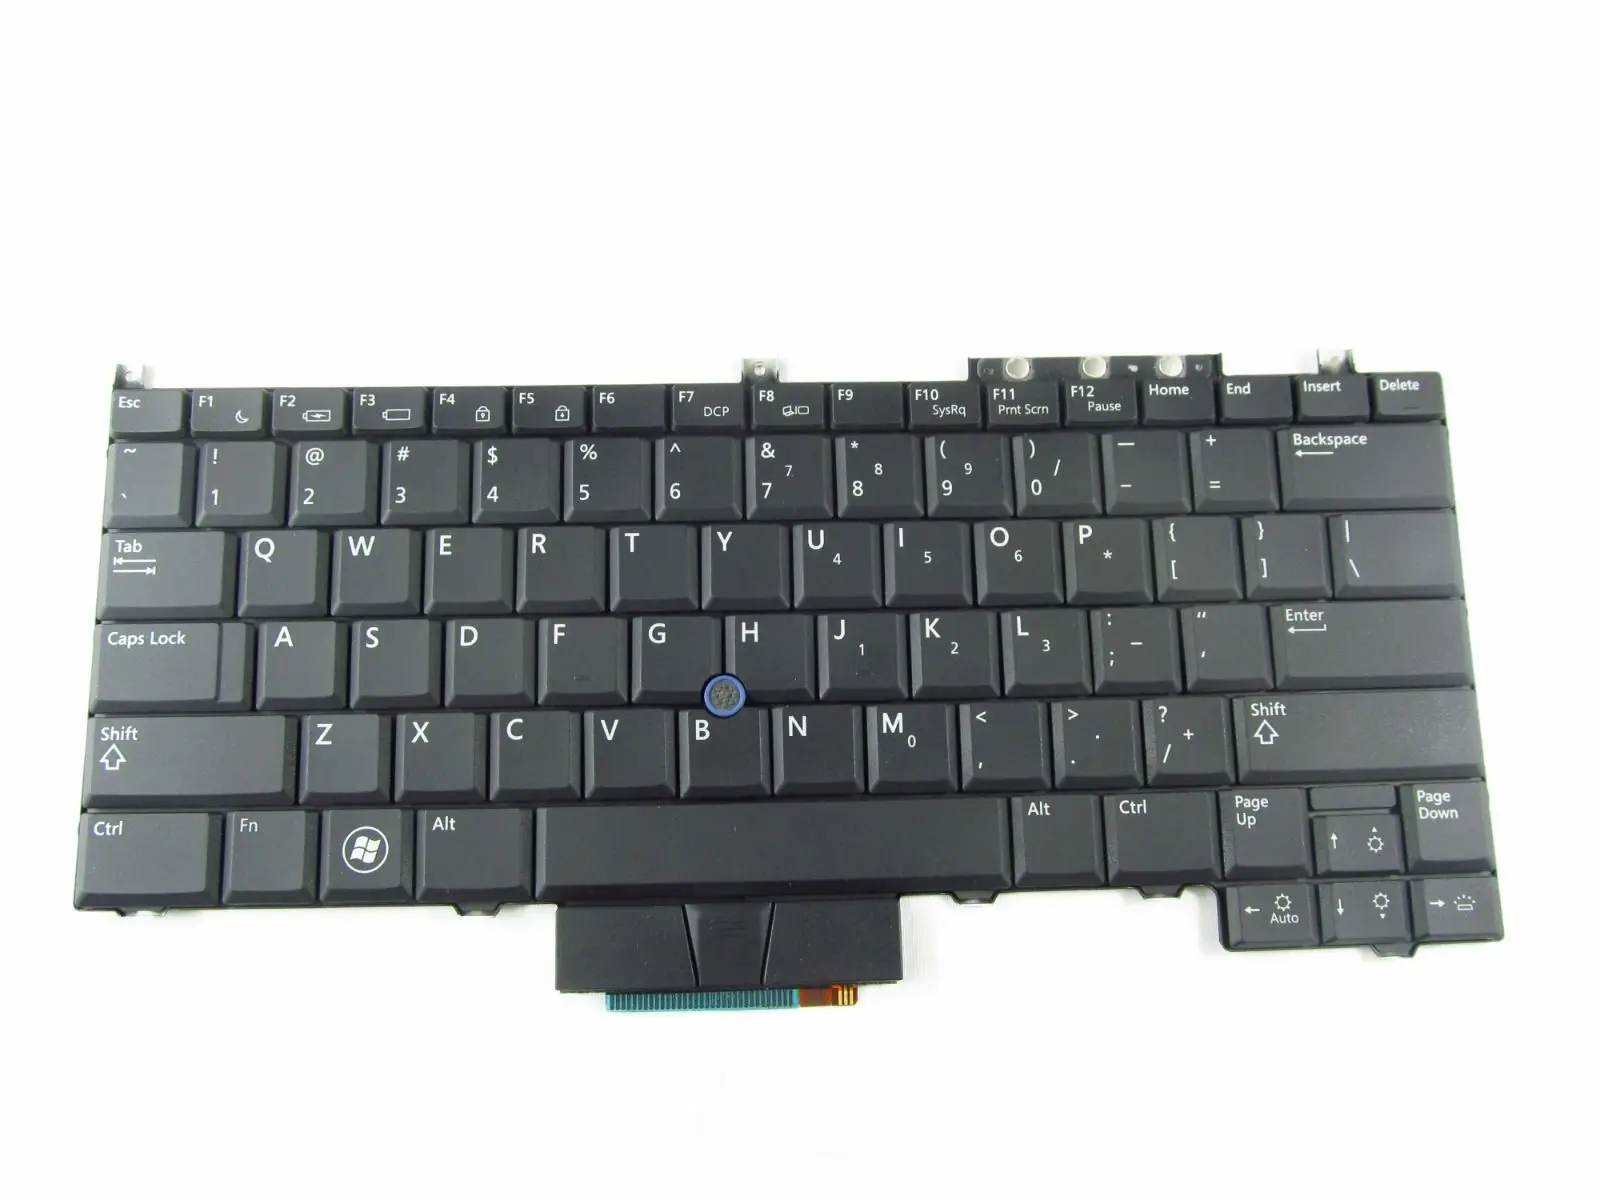 Keyboard For Dell Laptop Latitude E4300 Kr737 With Backlight Us Layout 90 New Keyboard For Dell Keyboard For Laptopdell Latitude Laptop Keyboard Aliexpress